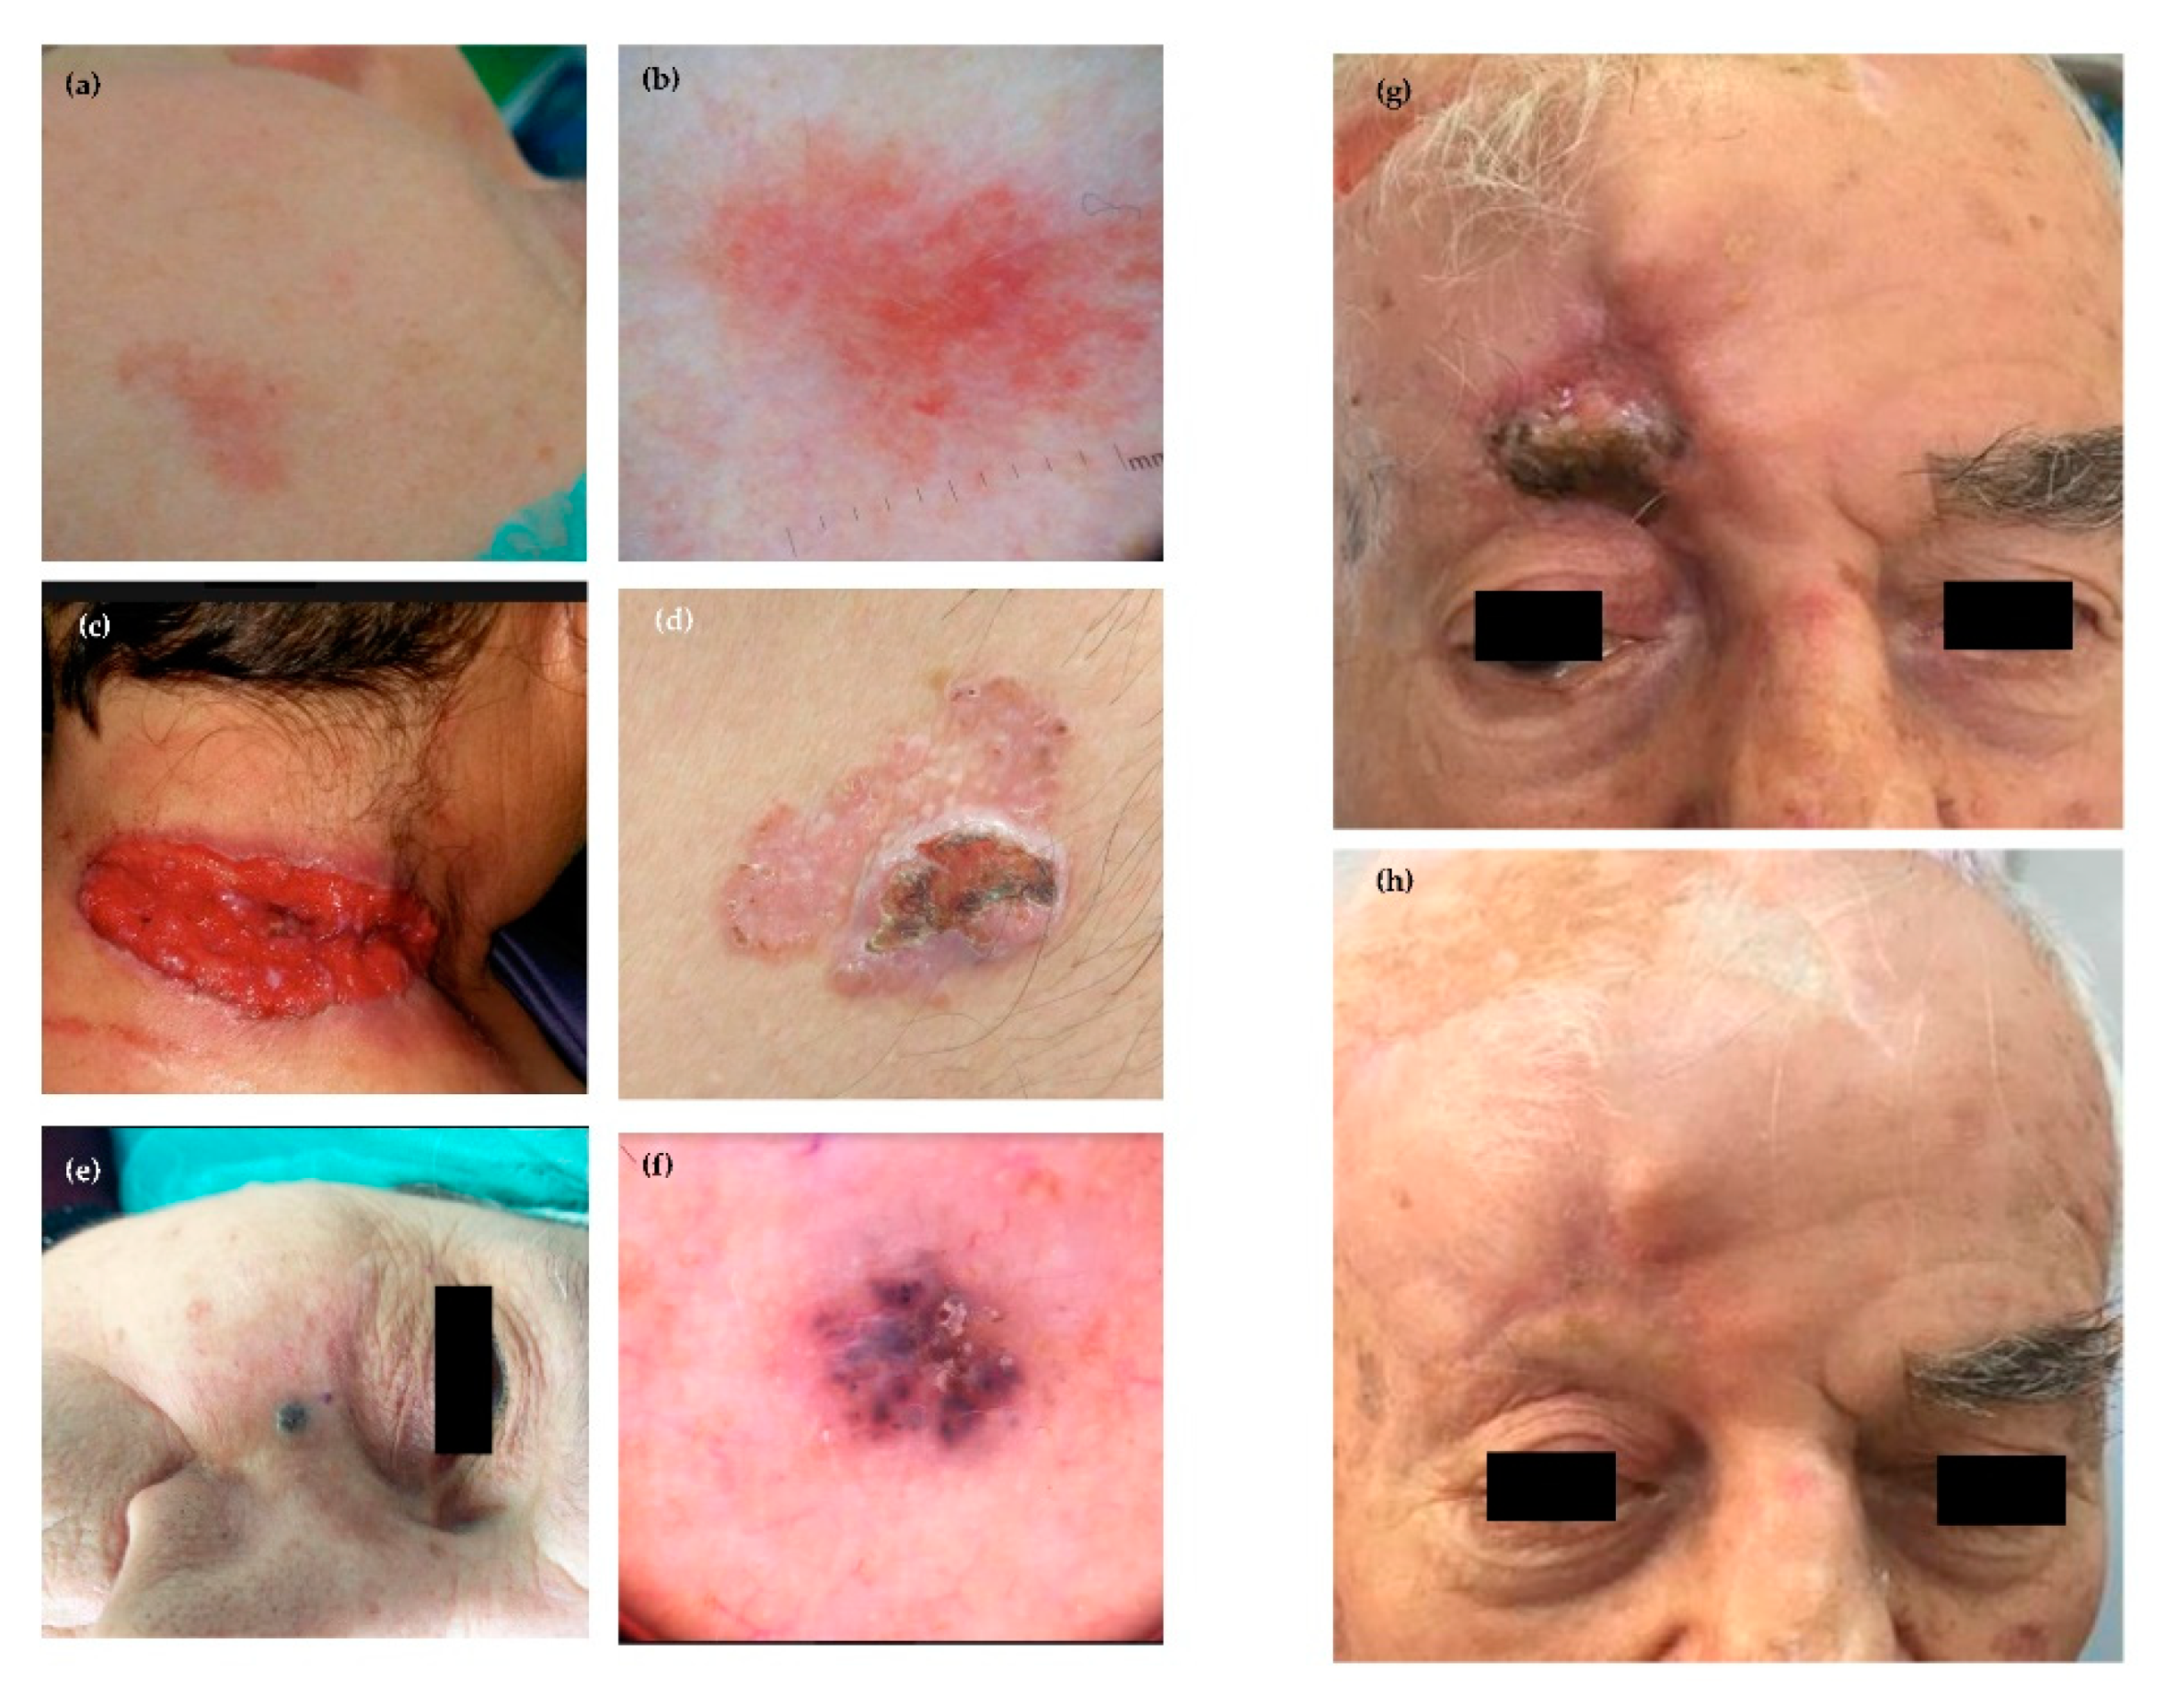 IJMS | Free Full-Text | Non-Melanoma Skin Cancers: Biological and Clinical  Features | HTML